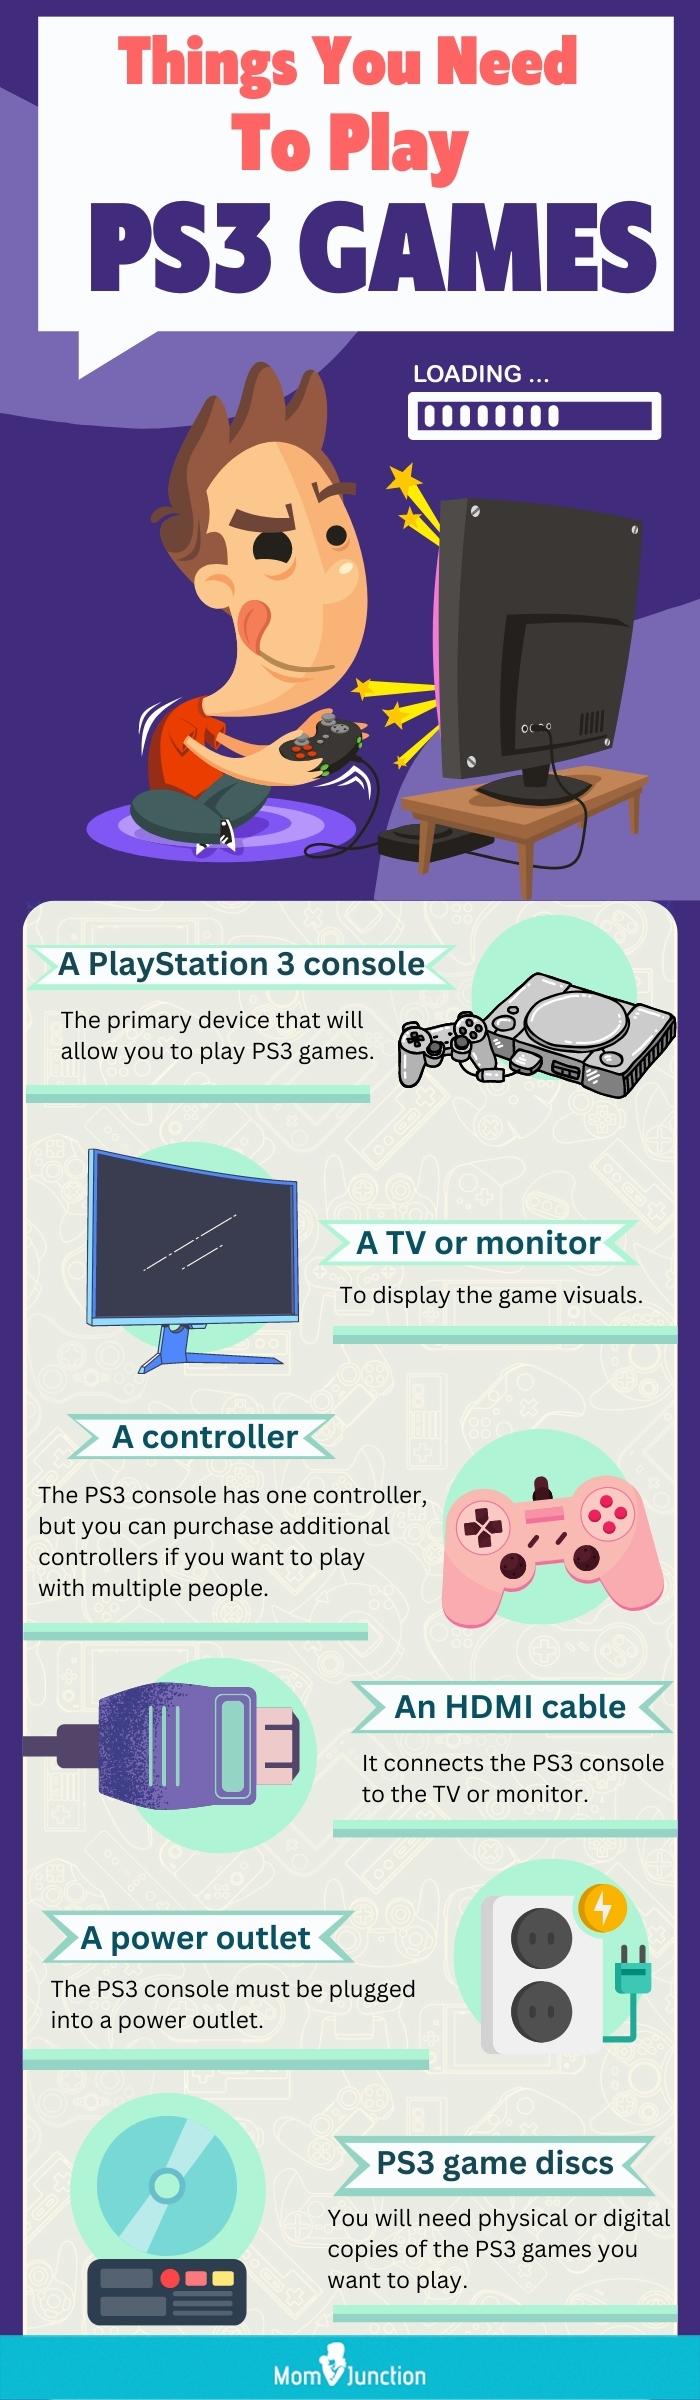 Things You Need To Play PS3 Games Row-13 content team (infographic)